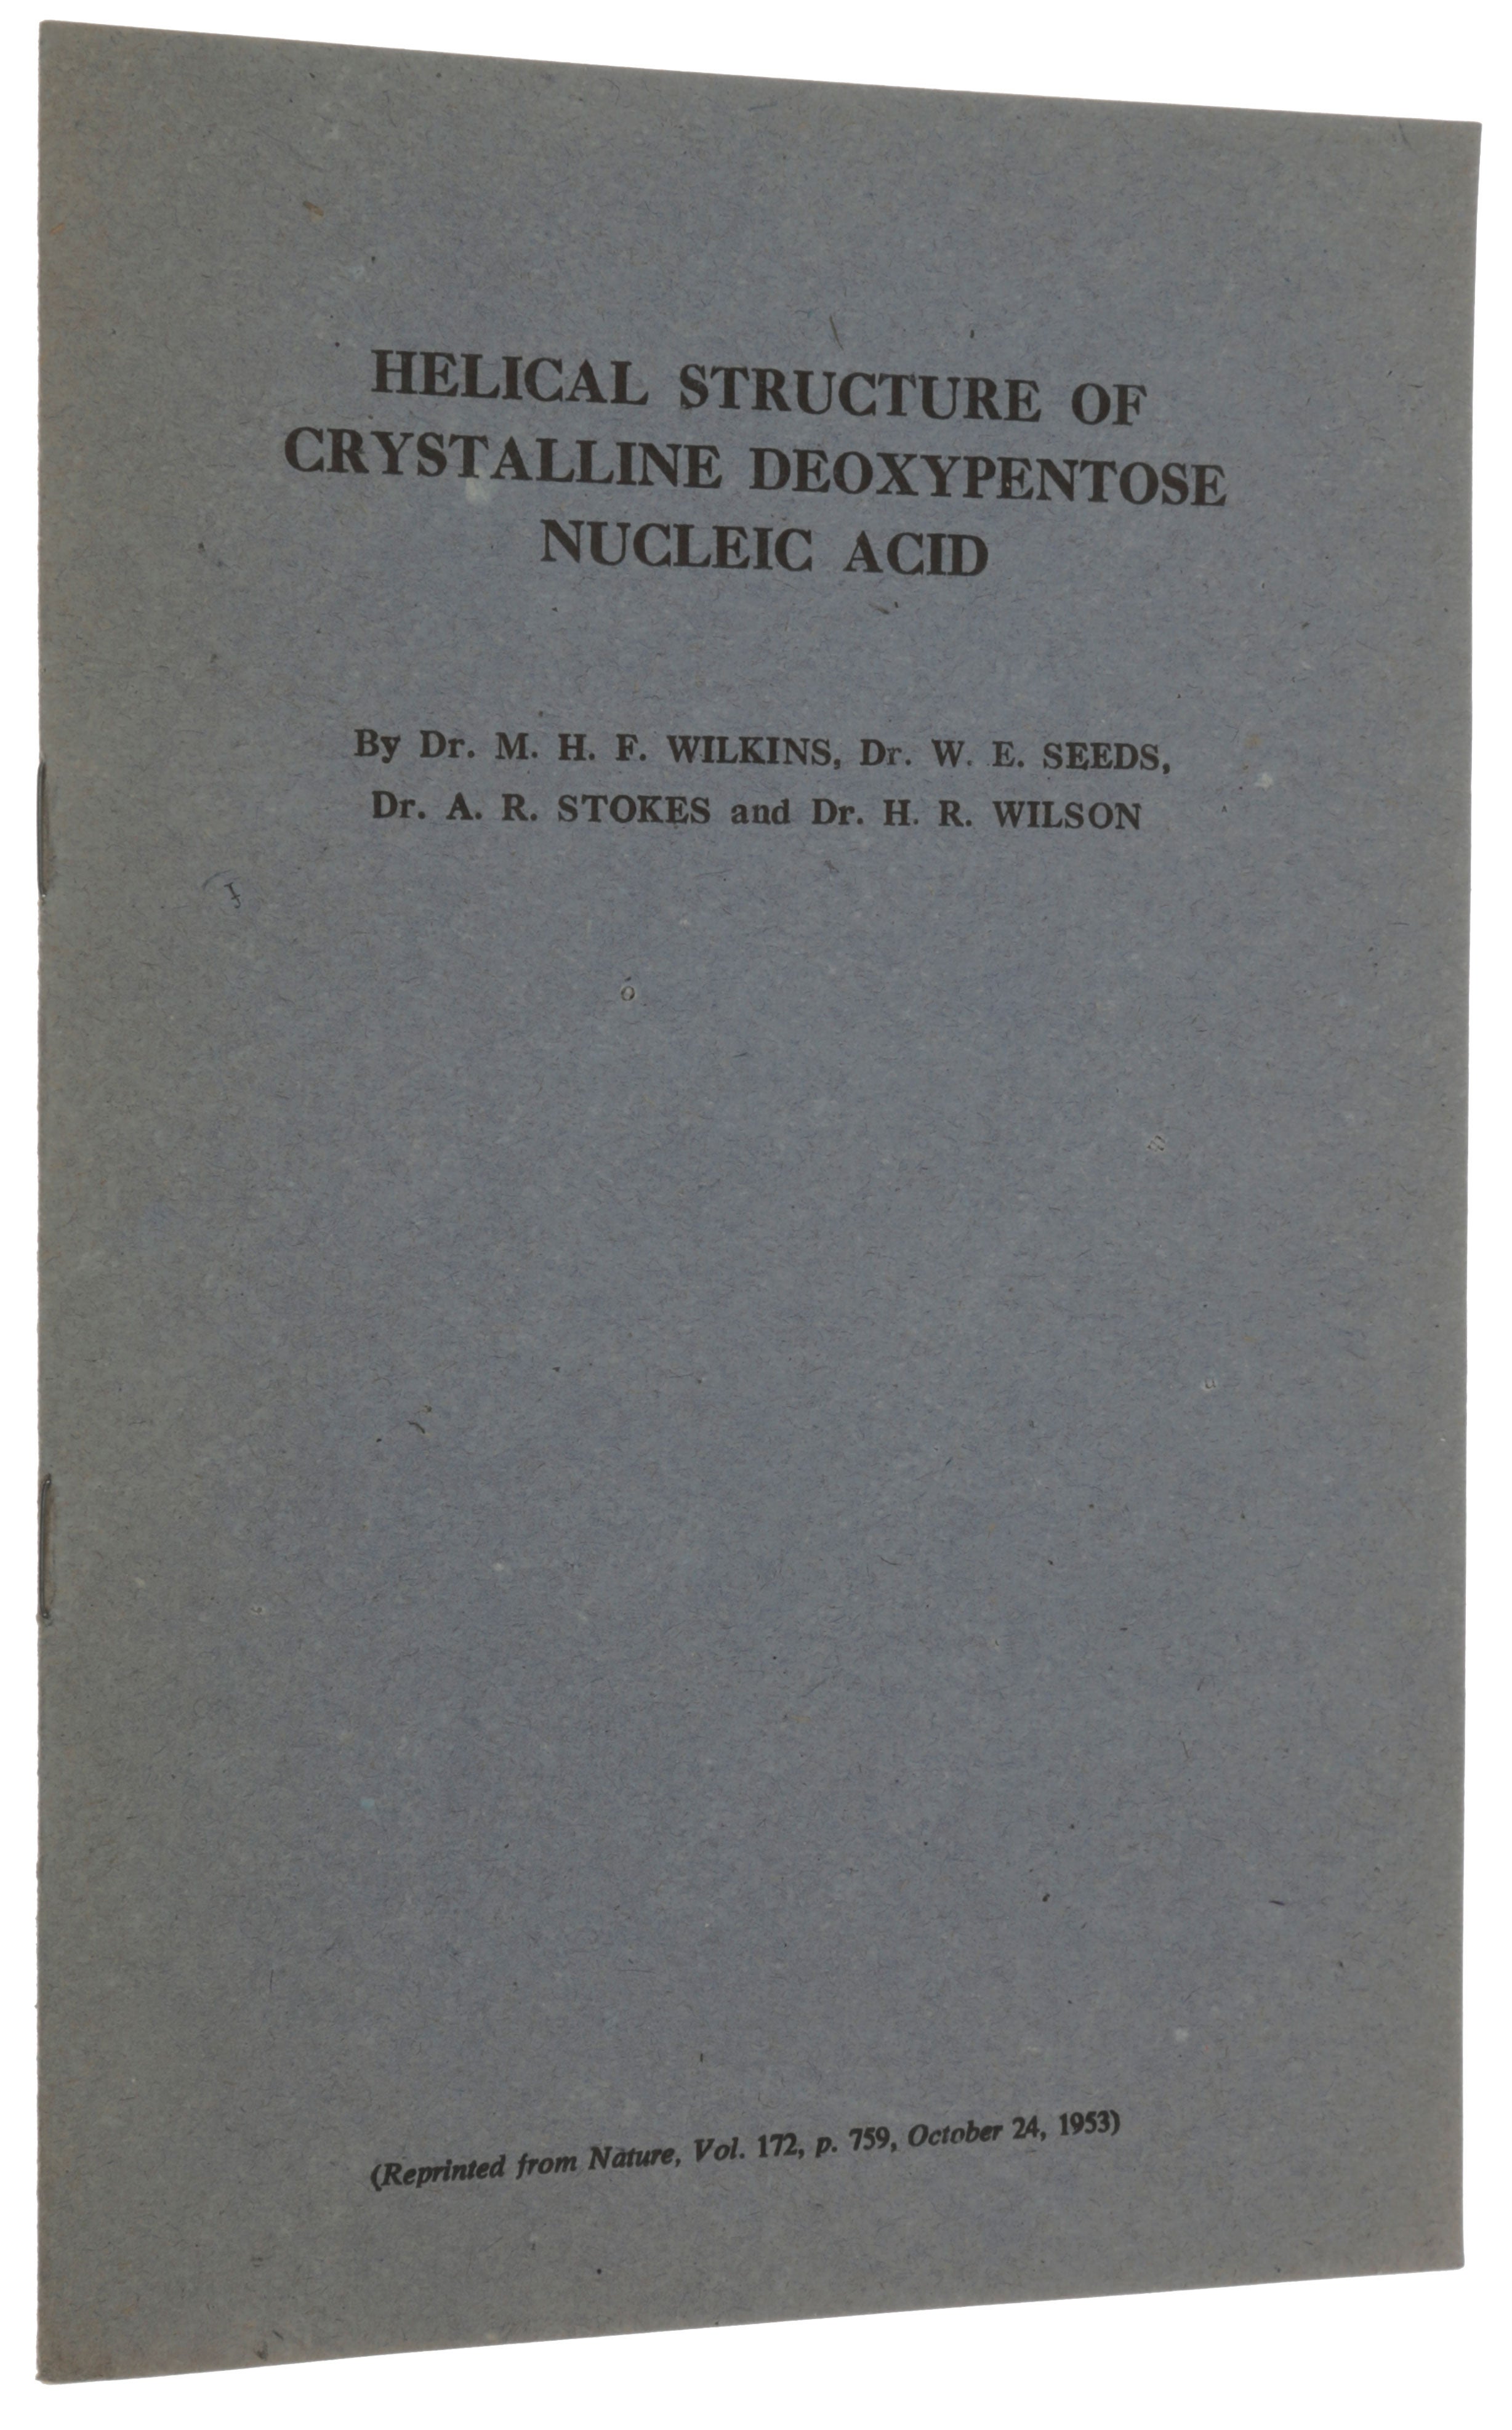 Item #5006 Helical structure of crystalline deoxypentose nucleic acid. Offprint from: Nature, Vol. 172, No. 4382, October 24, 1953. M. H. F. WILKINS, A. R., STOKES, W. E., SEEDS, H. R. WILSON.